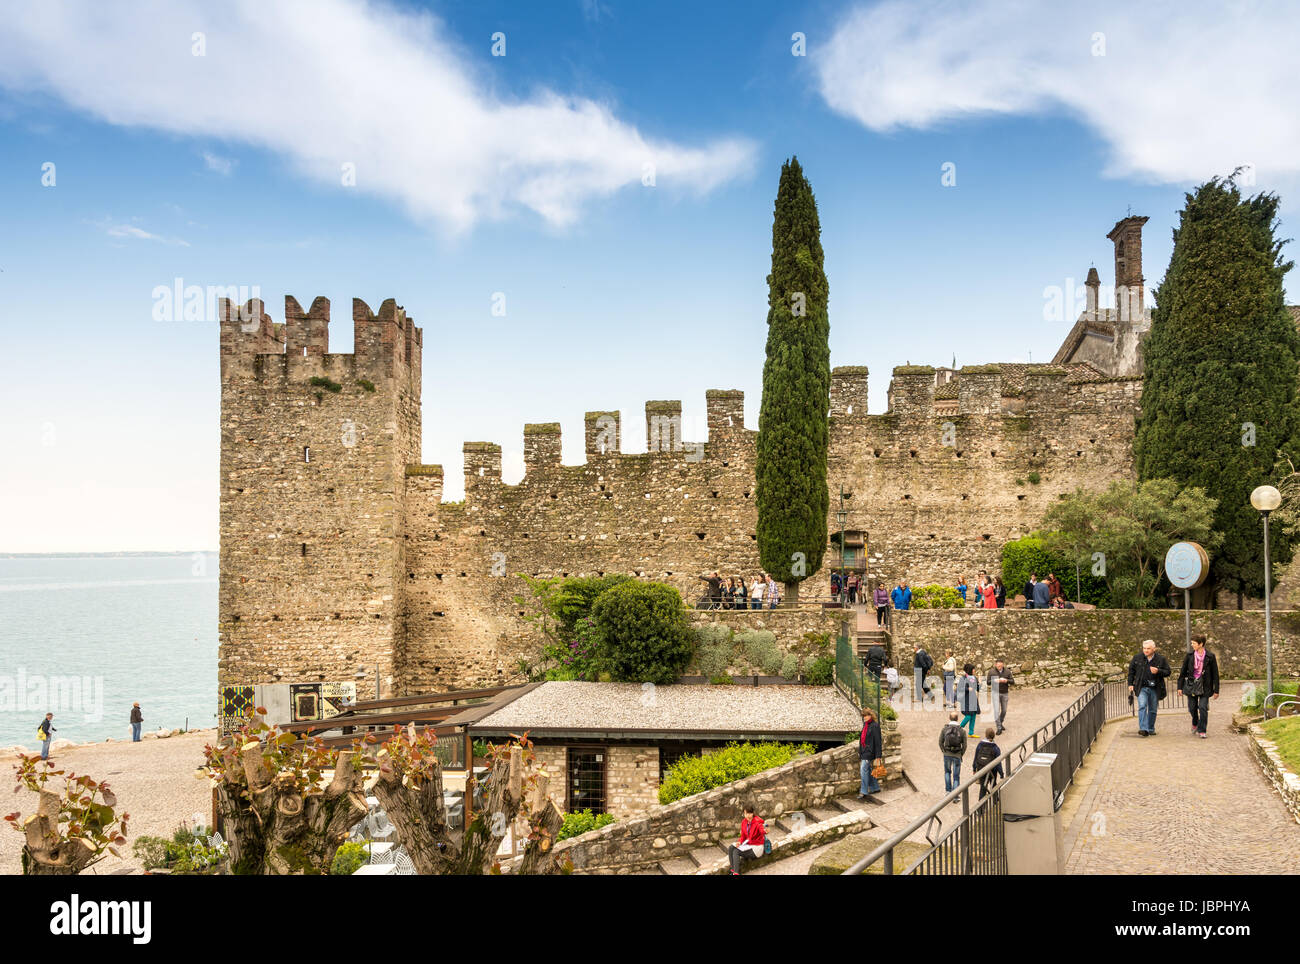 SIRMIONE, ITALY - APRIL 23: Tourists at Scaliger Castle in Sirmione, Italy on April 23, 2014. The castle was built in the 13th century. Foto taken from via Romagnionli. Stock Photo